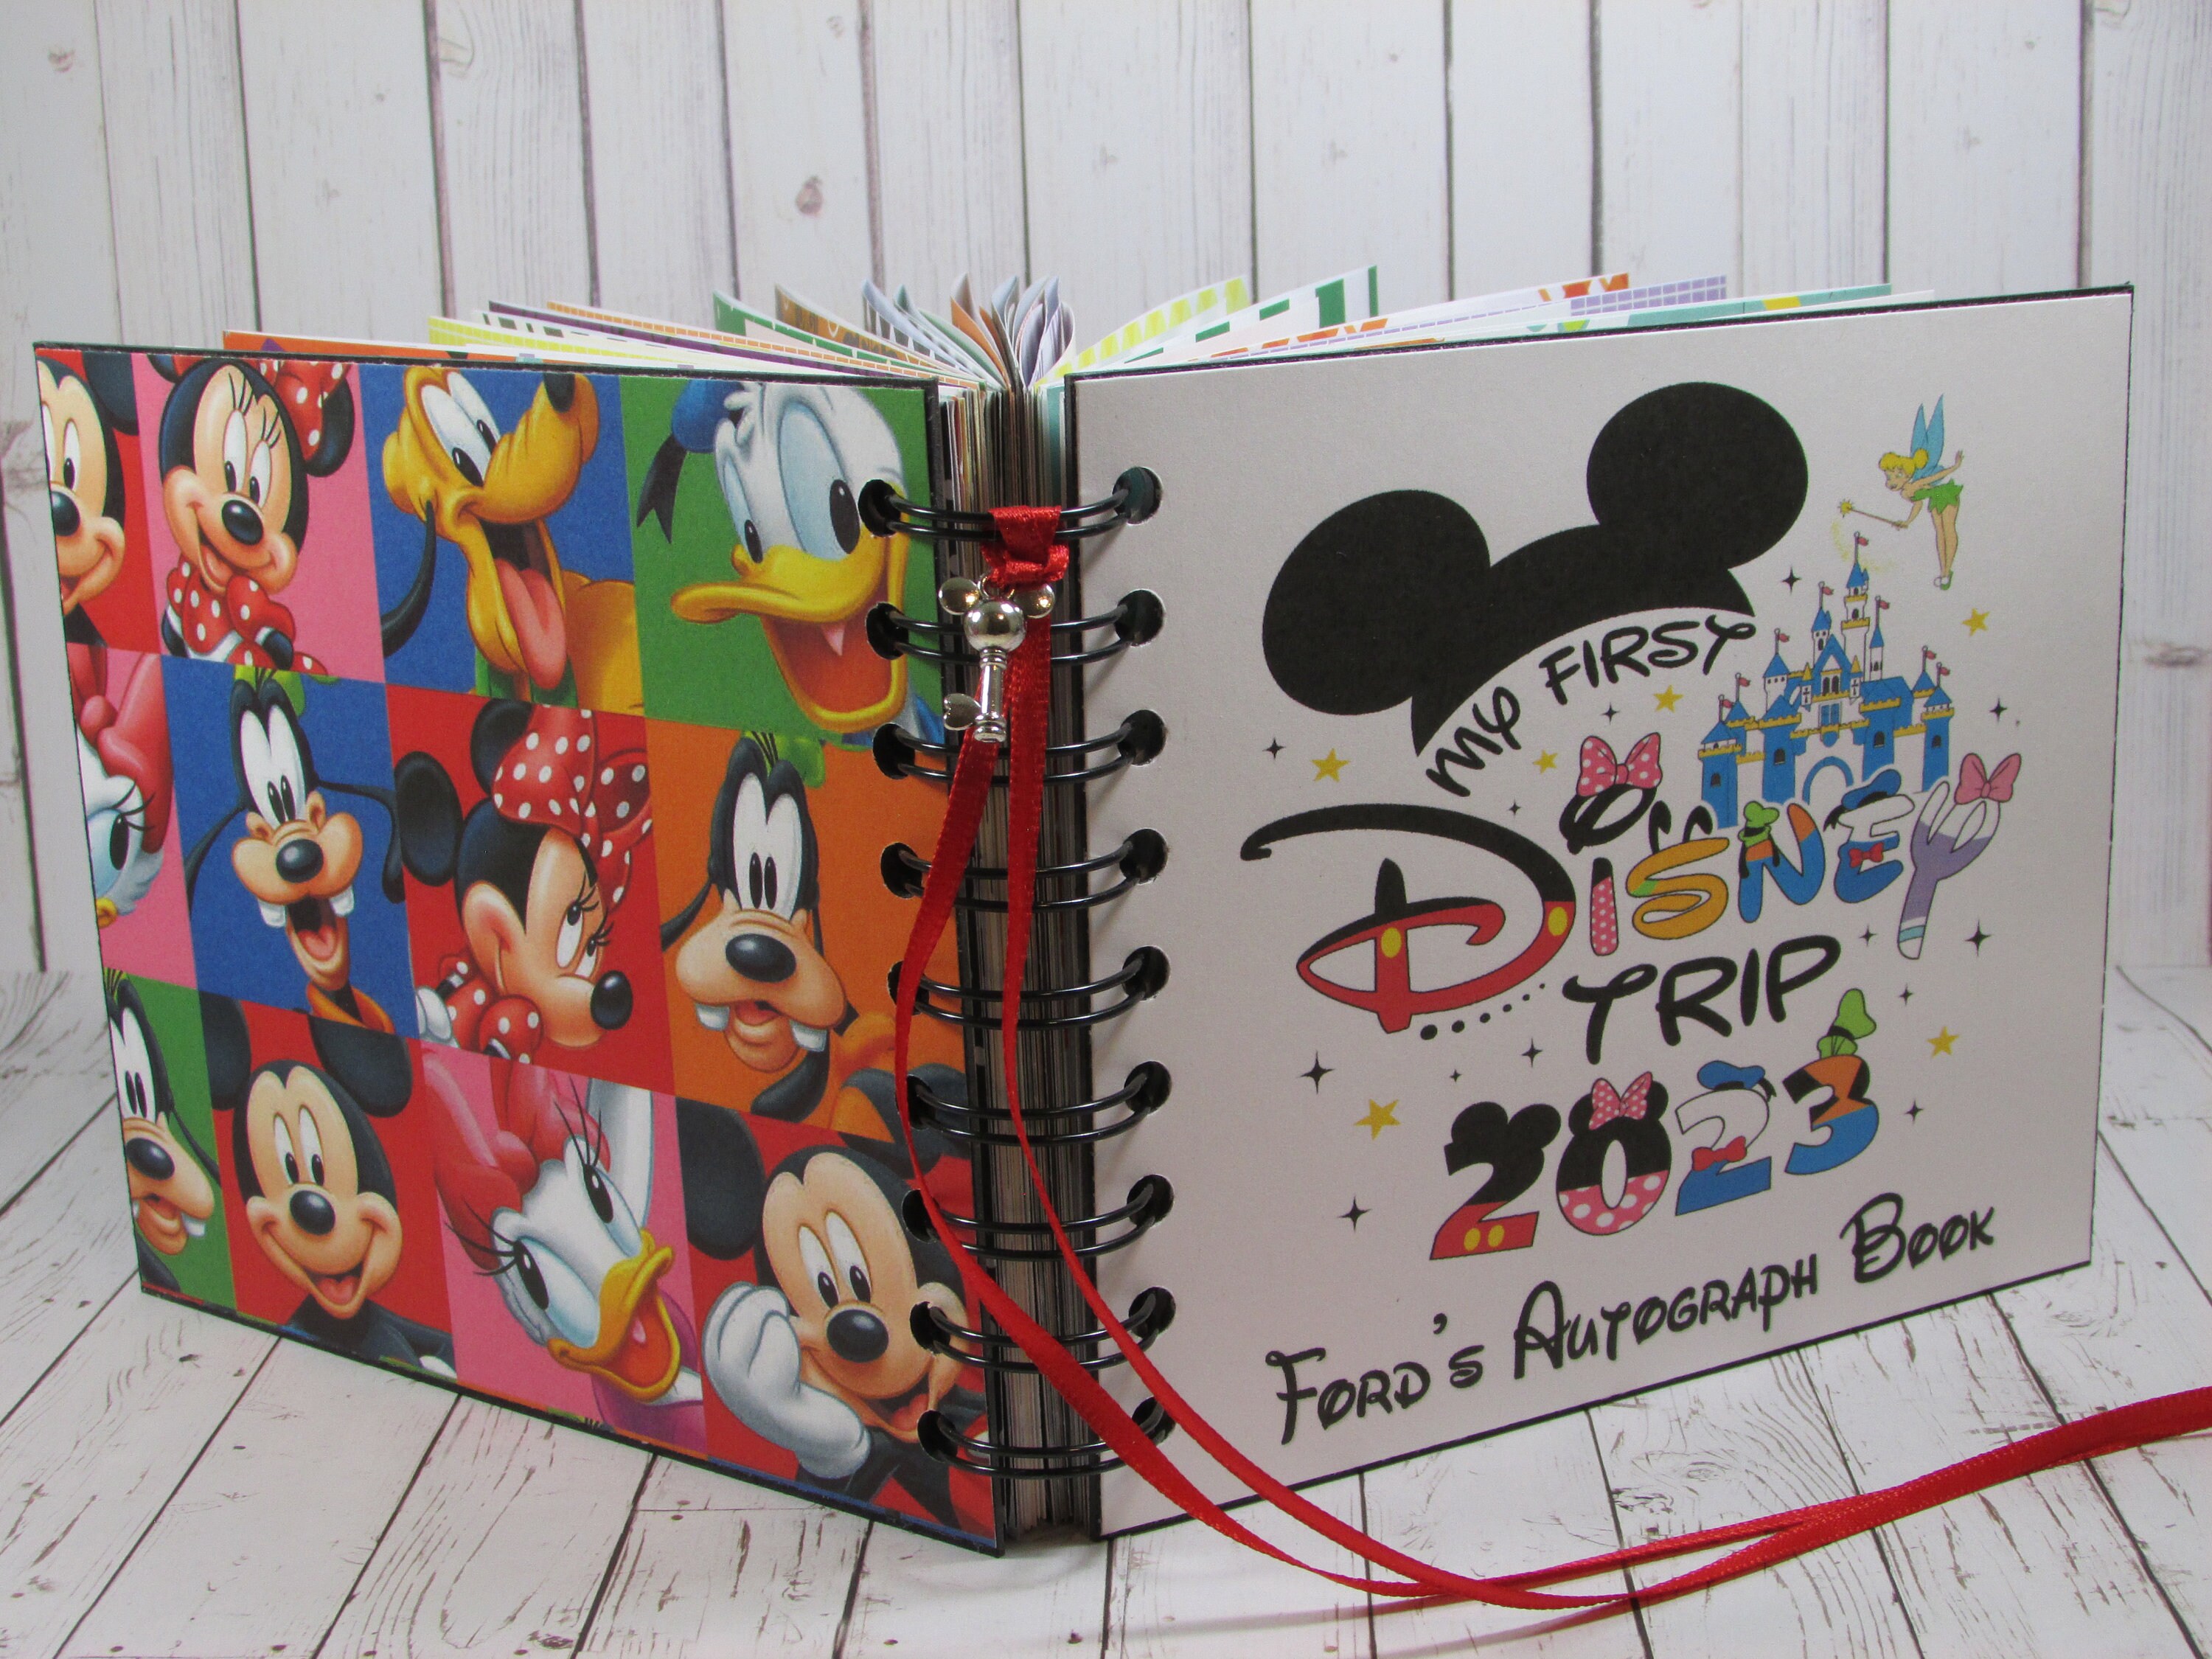 I found my old autograph book from my Disney World trip in 2000